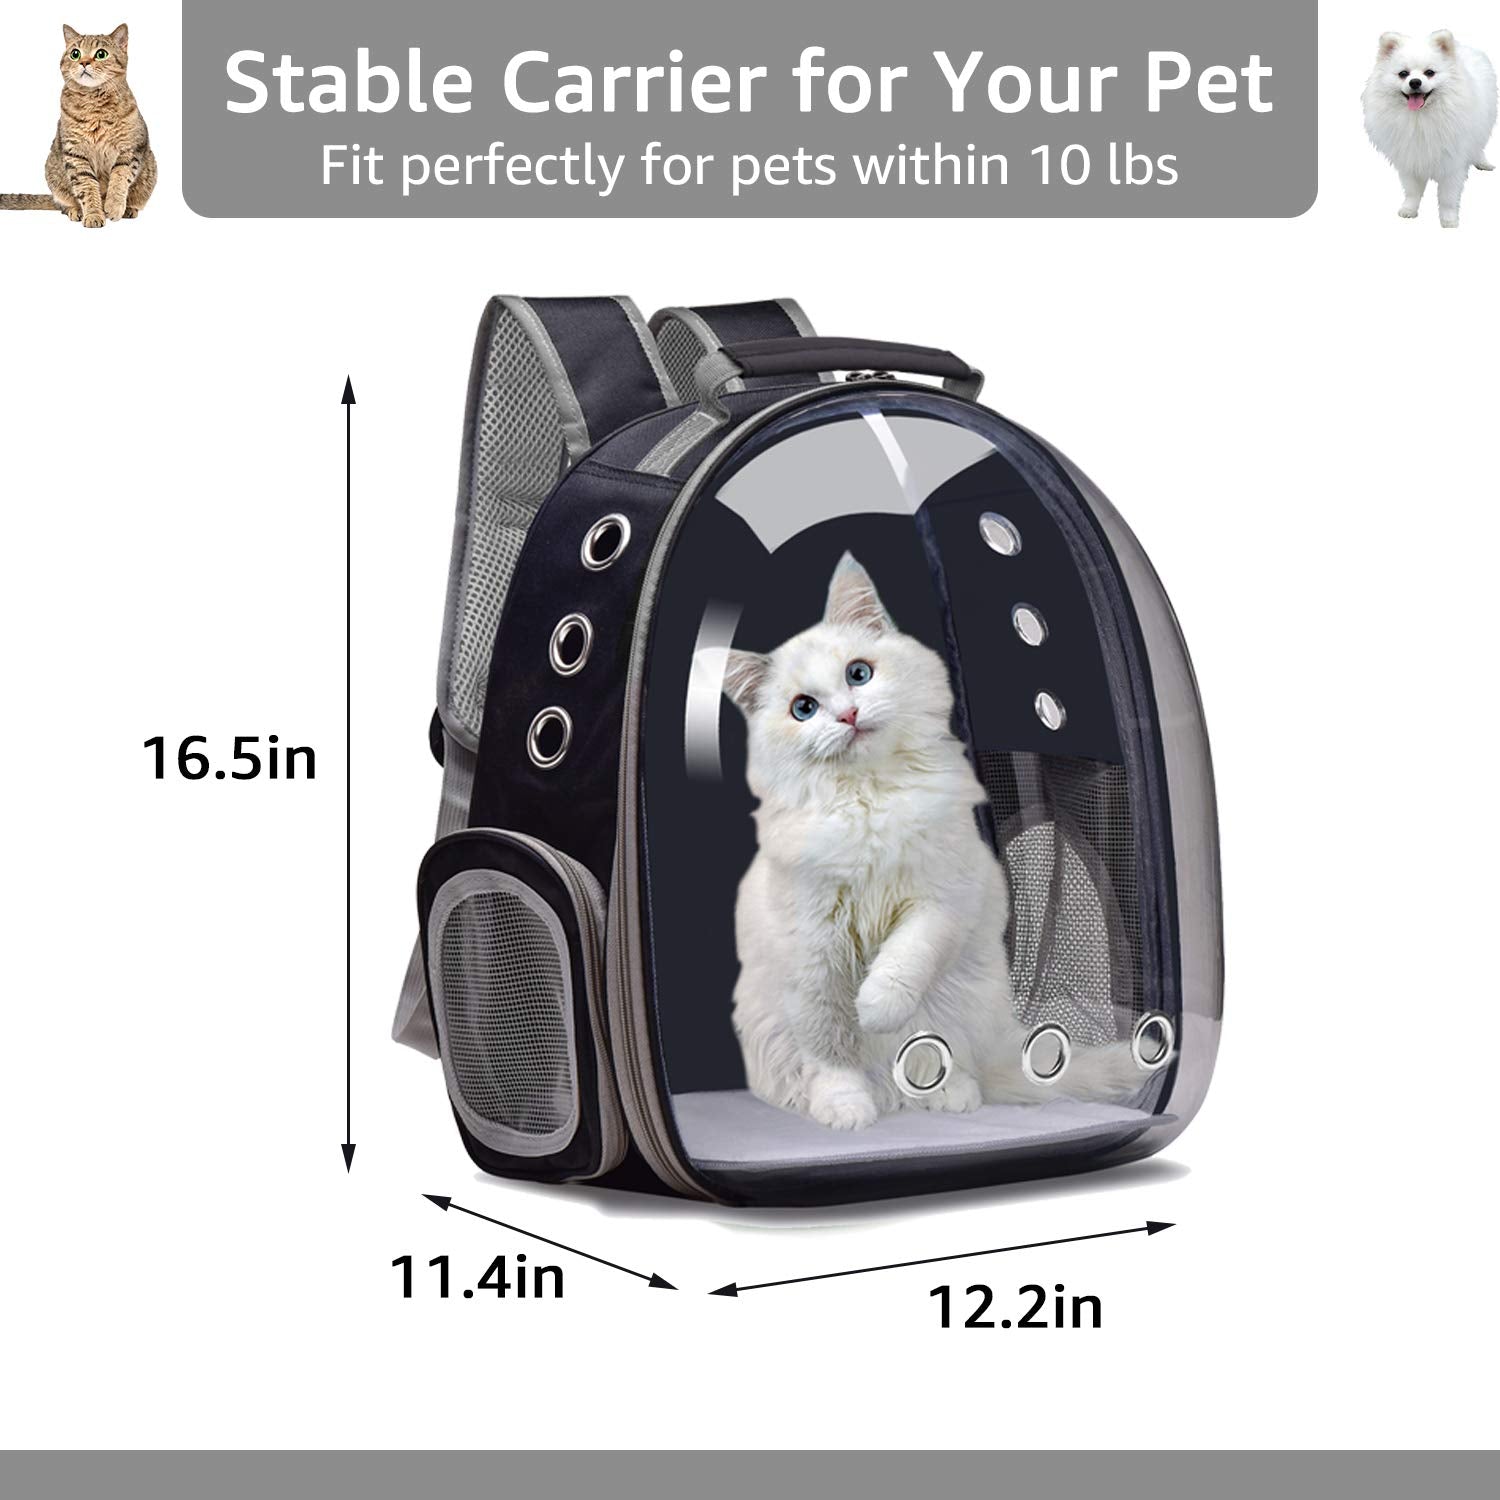 Henkelion Cat Backpack Carrier Bubble Bag, Small Dog Backpack Carrier for Small Dogs, Space Capsule Pet Carrier Dog Hiking Backpack Airline Approved Travel Carrier - Black Grey Pink Blue Purple Green